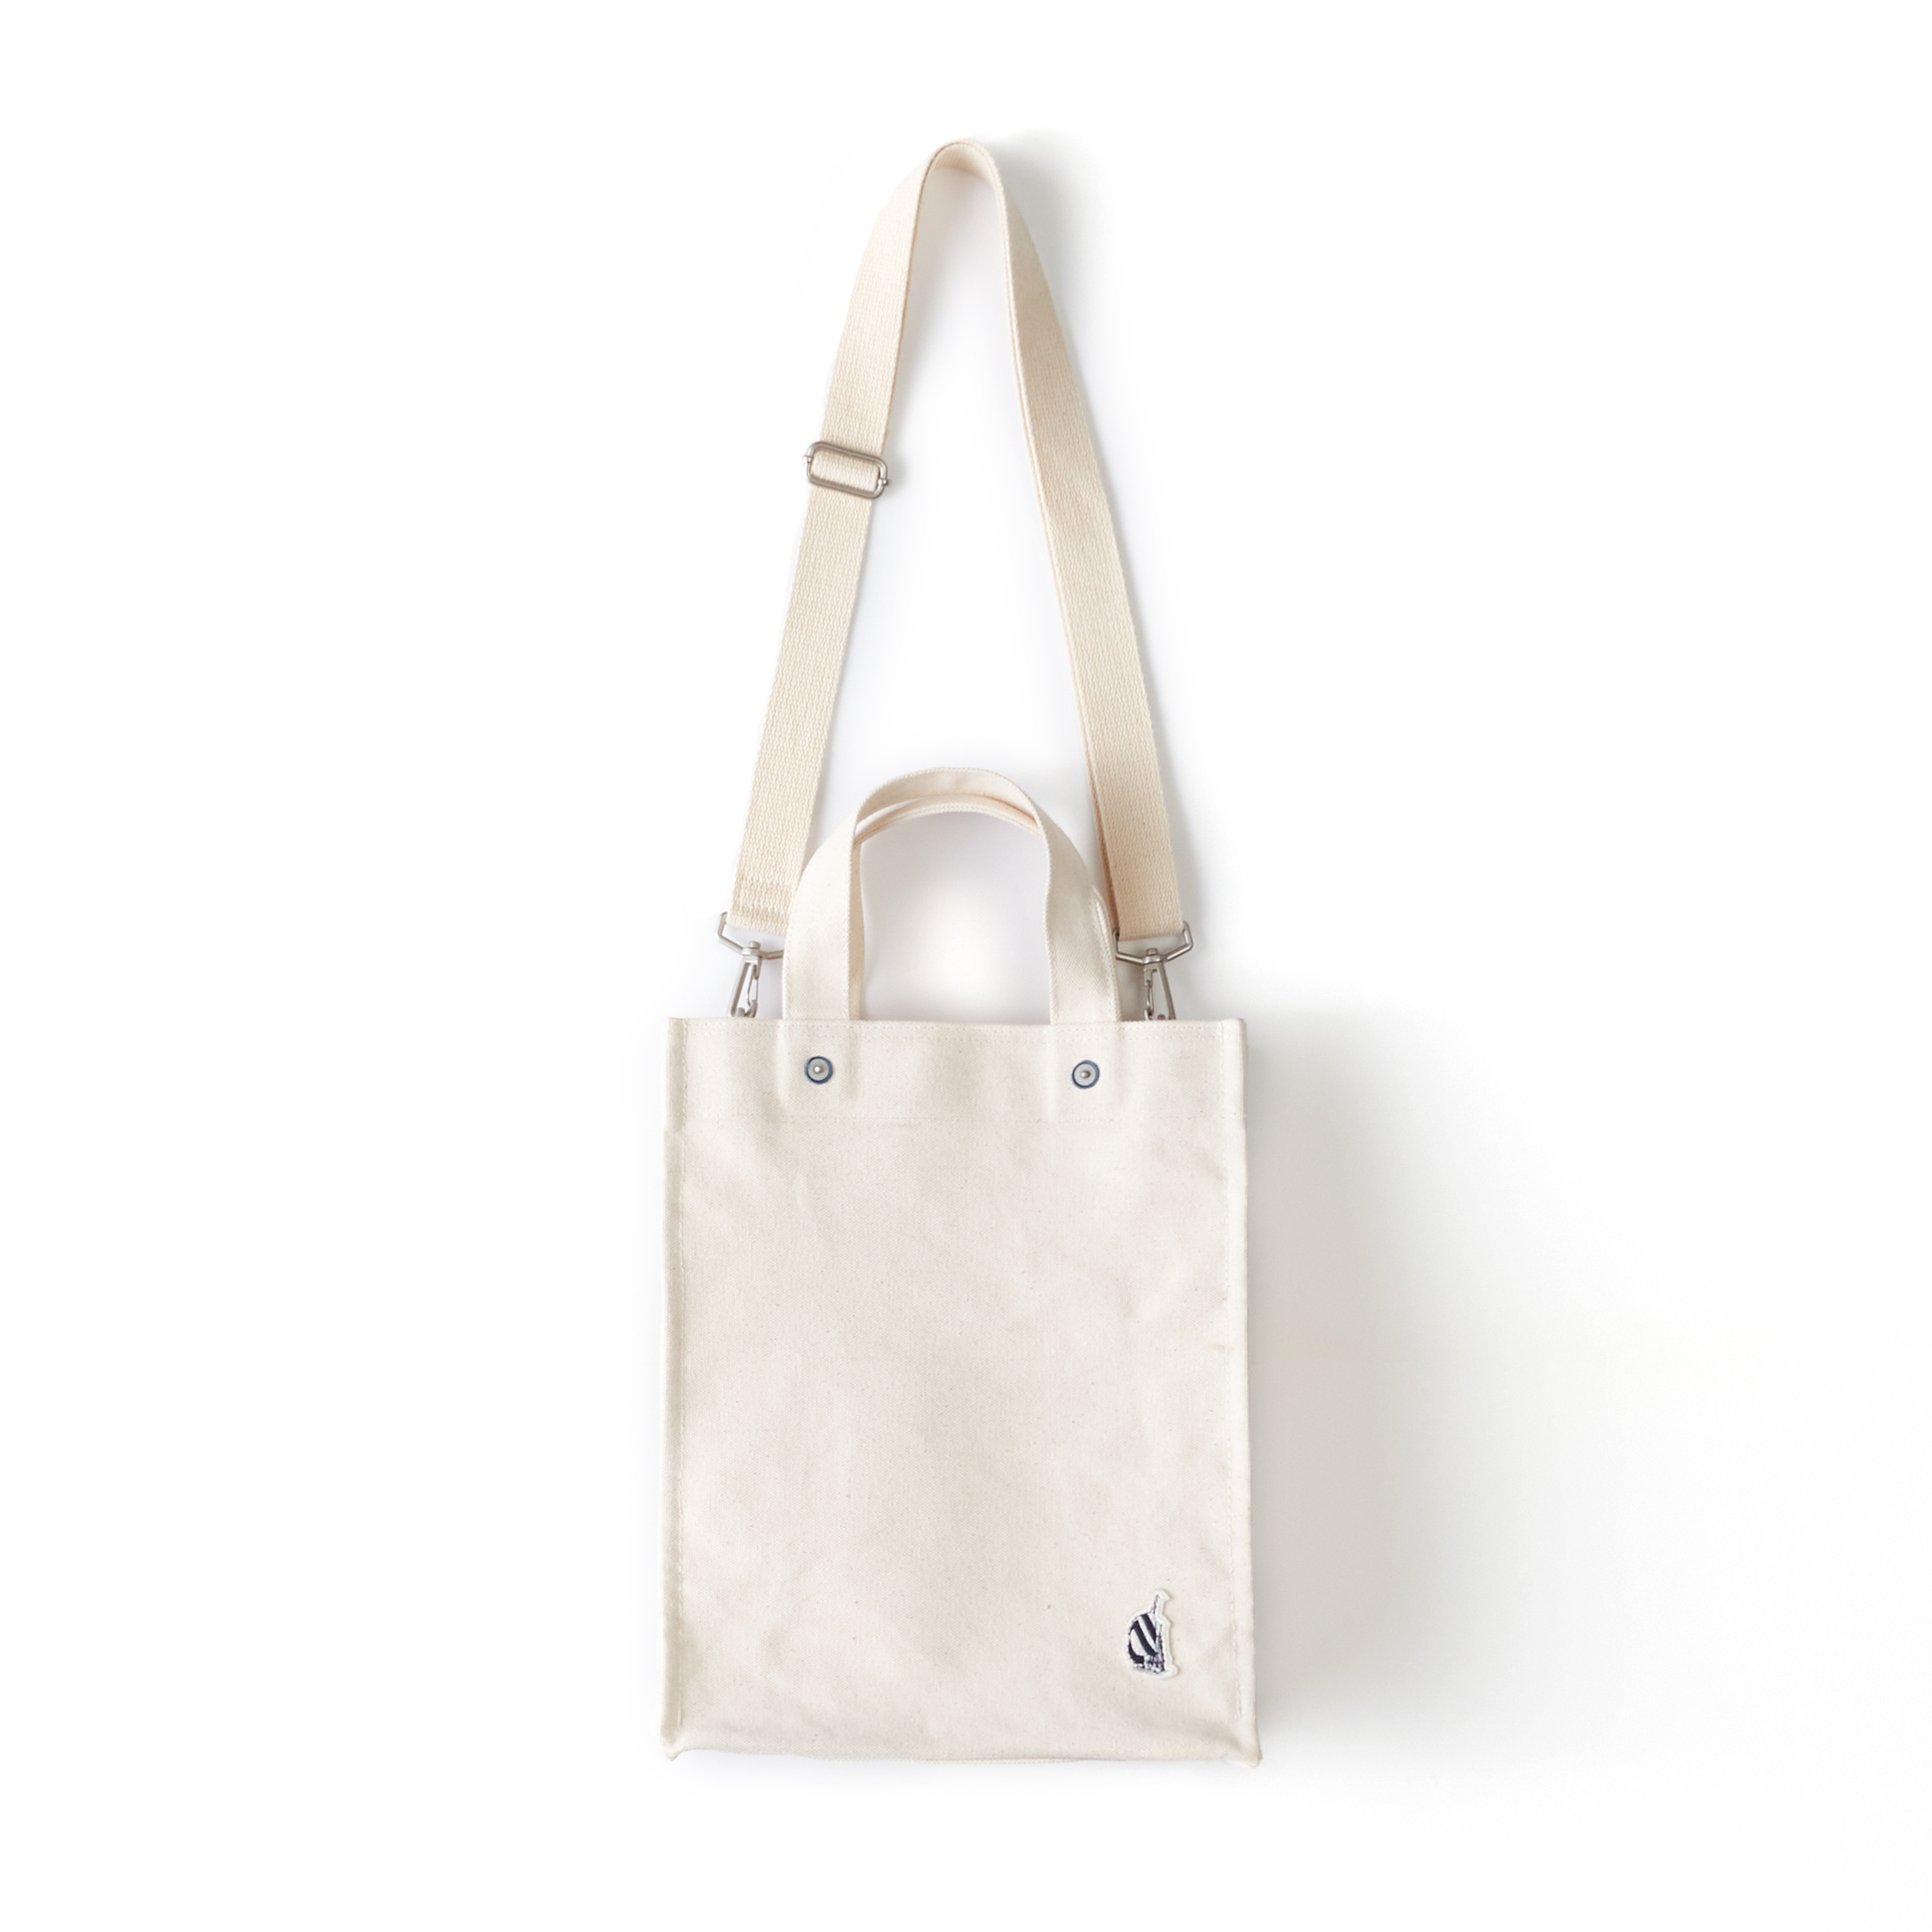 POINT TOTE BAG 011 OFF WHITE